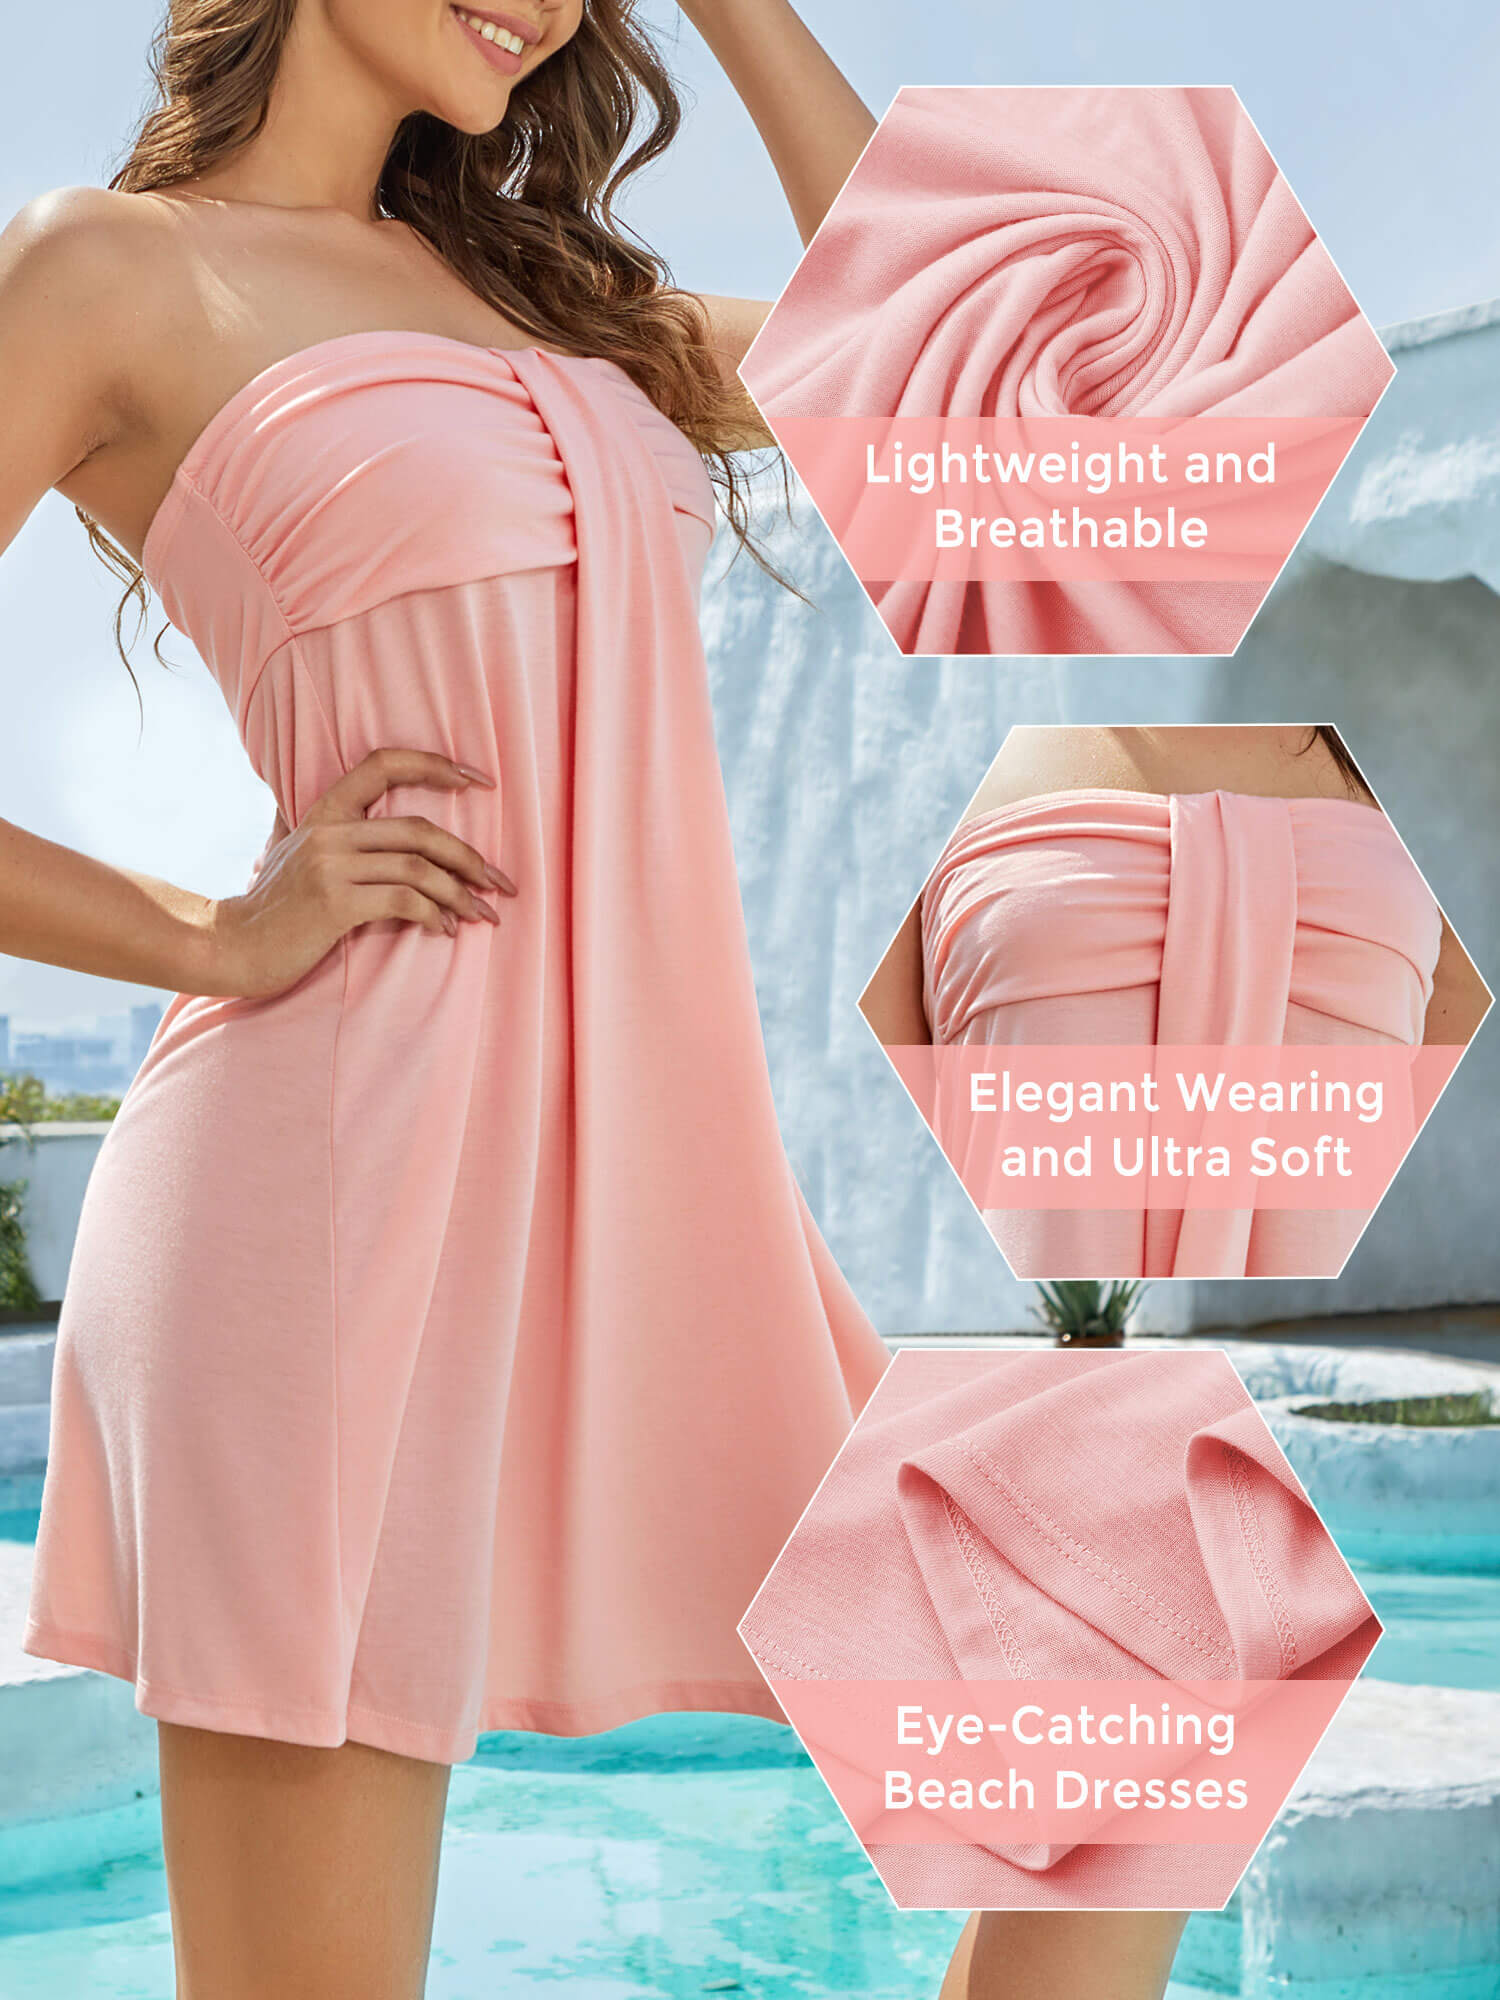 As Rose Rich Women's Strapless Dress Beach Cover up Tube Top Dresses, L - image 3 of 9